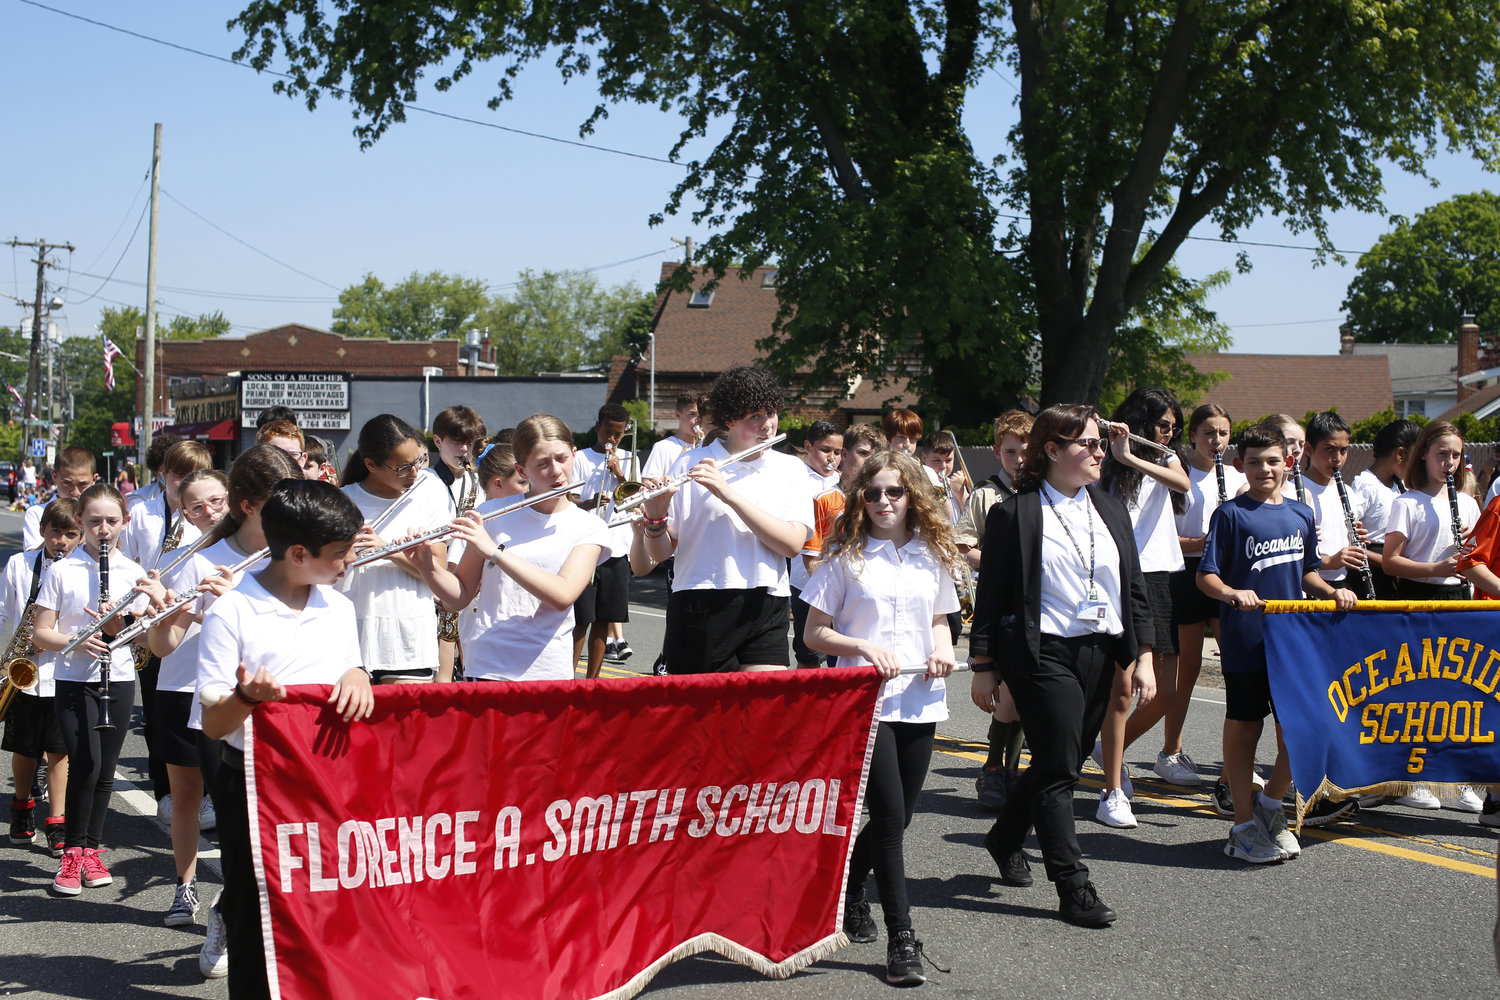 Oceanside School 8 and School 5 Bands marching and playing their instruments in the Oceanside Memorial Day Parade on Monday, May 30th 2022.